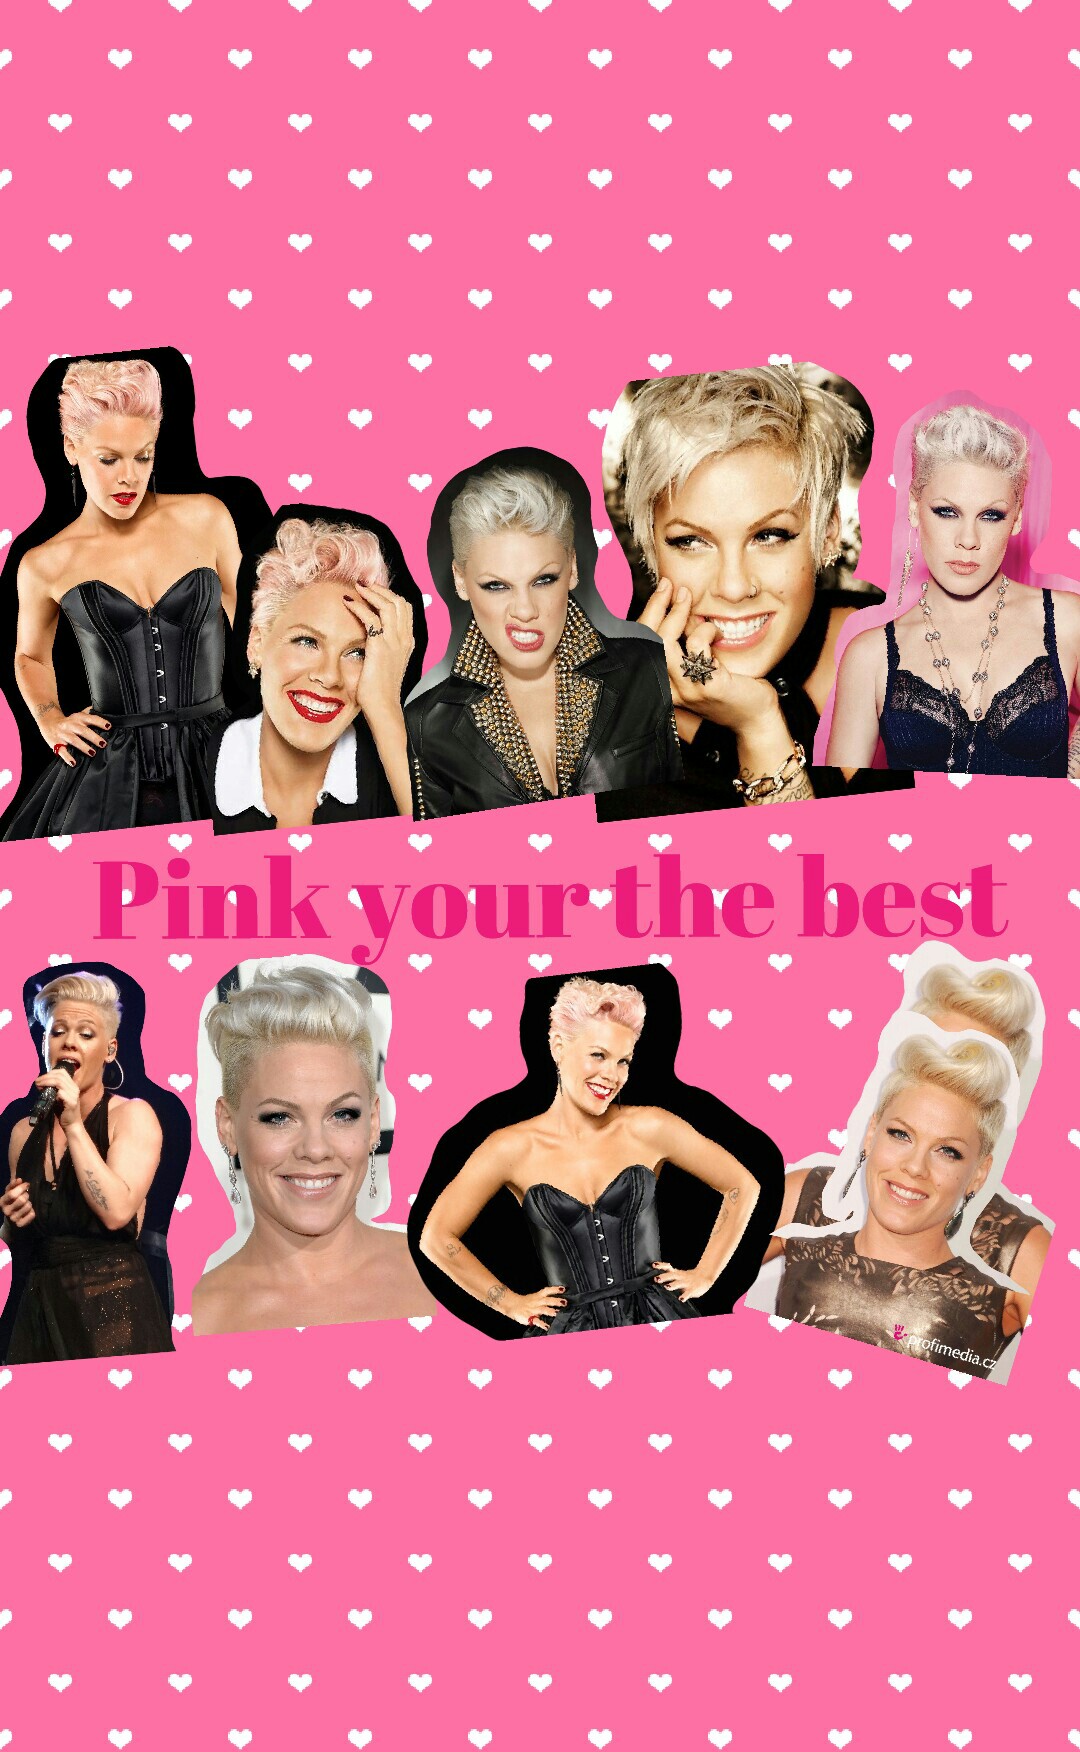 Pink your the best